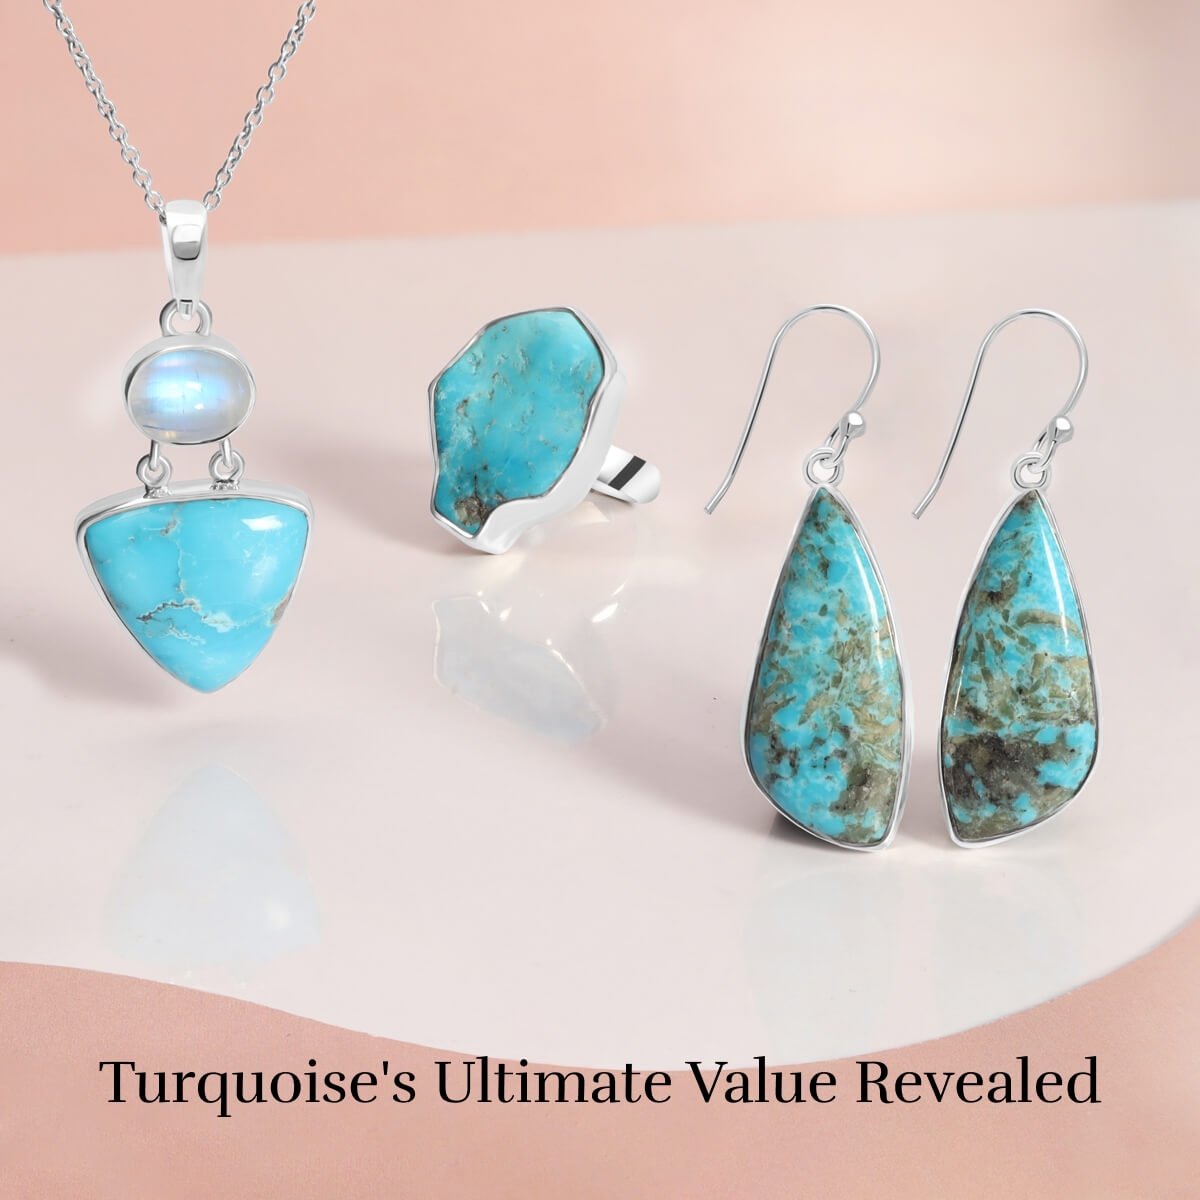 What Is The Most Valuable Turquoise?